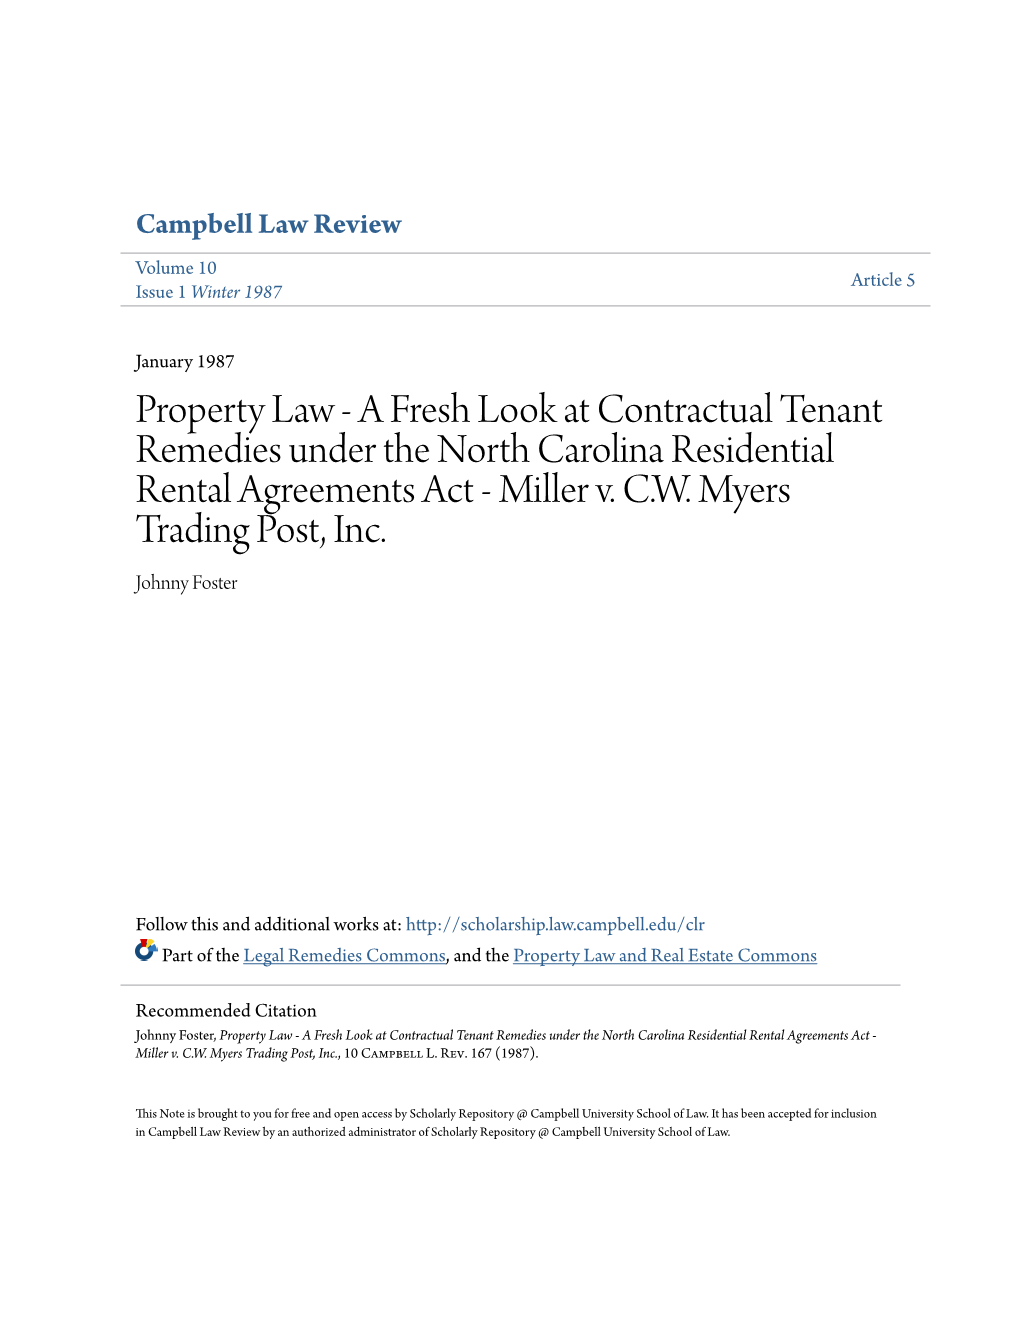 A Fresh Look at Contractual Tenant Remedies Under the North Carolina Residential Rental Agreements Act - Miller V